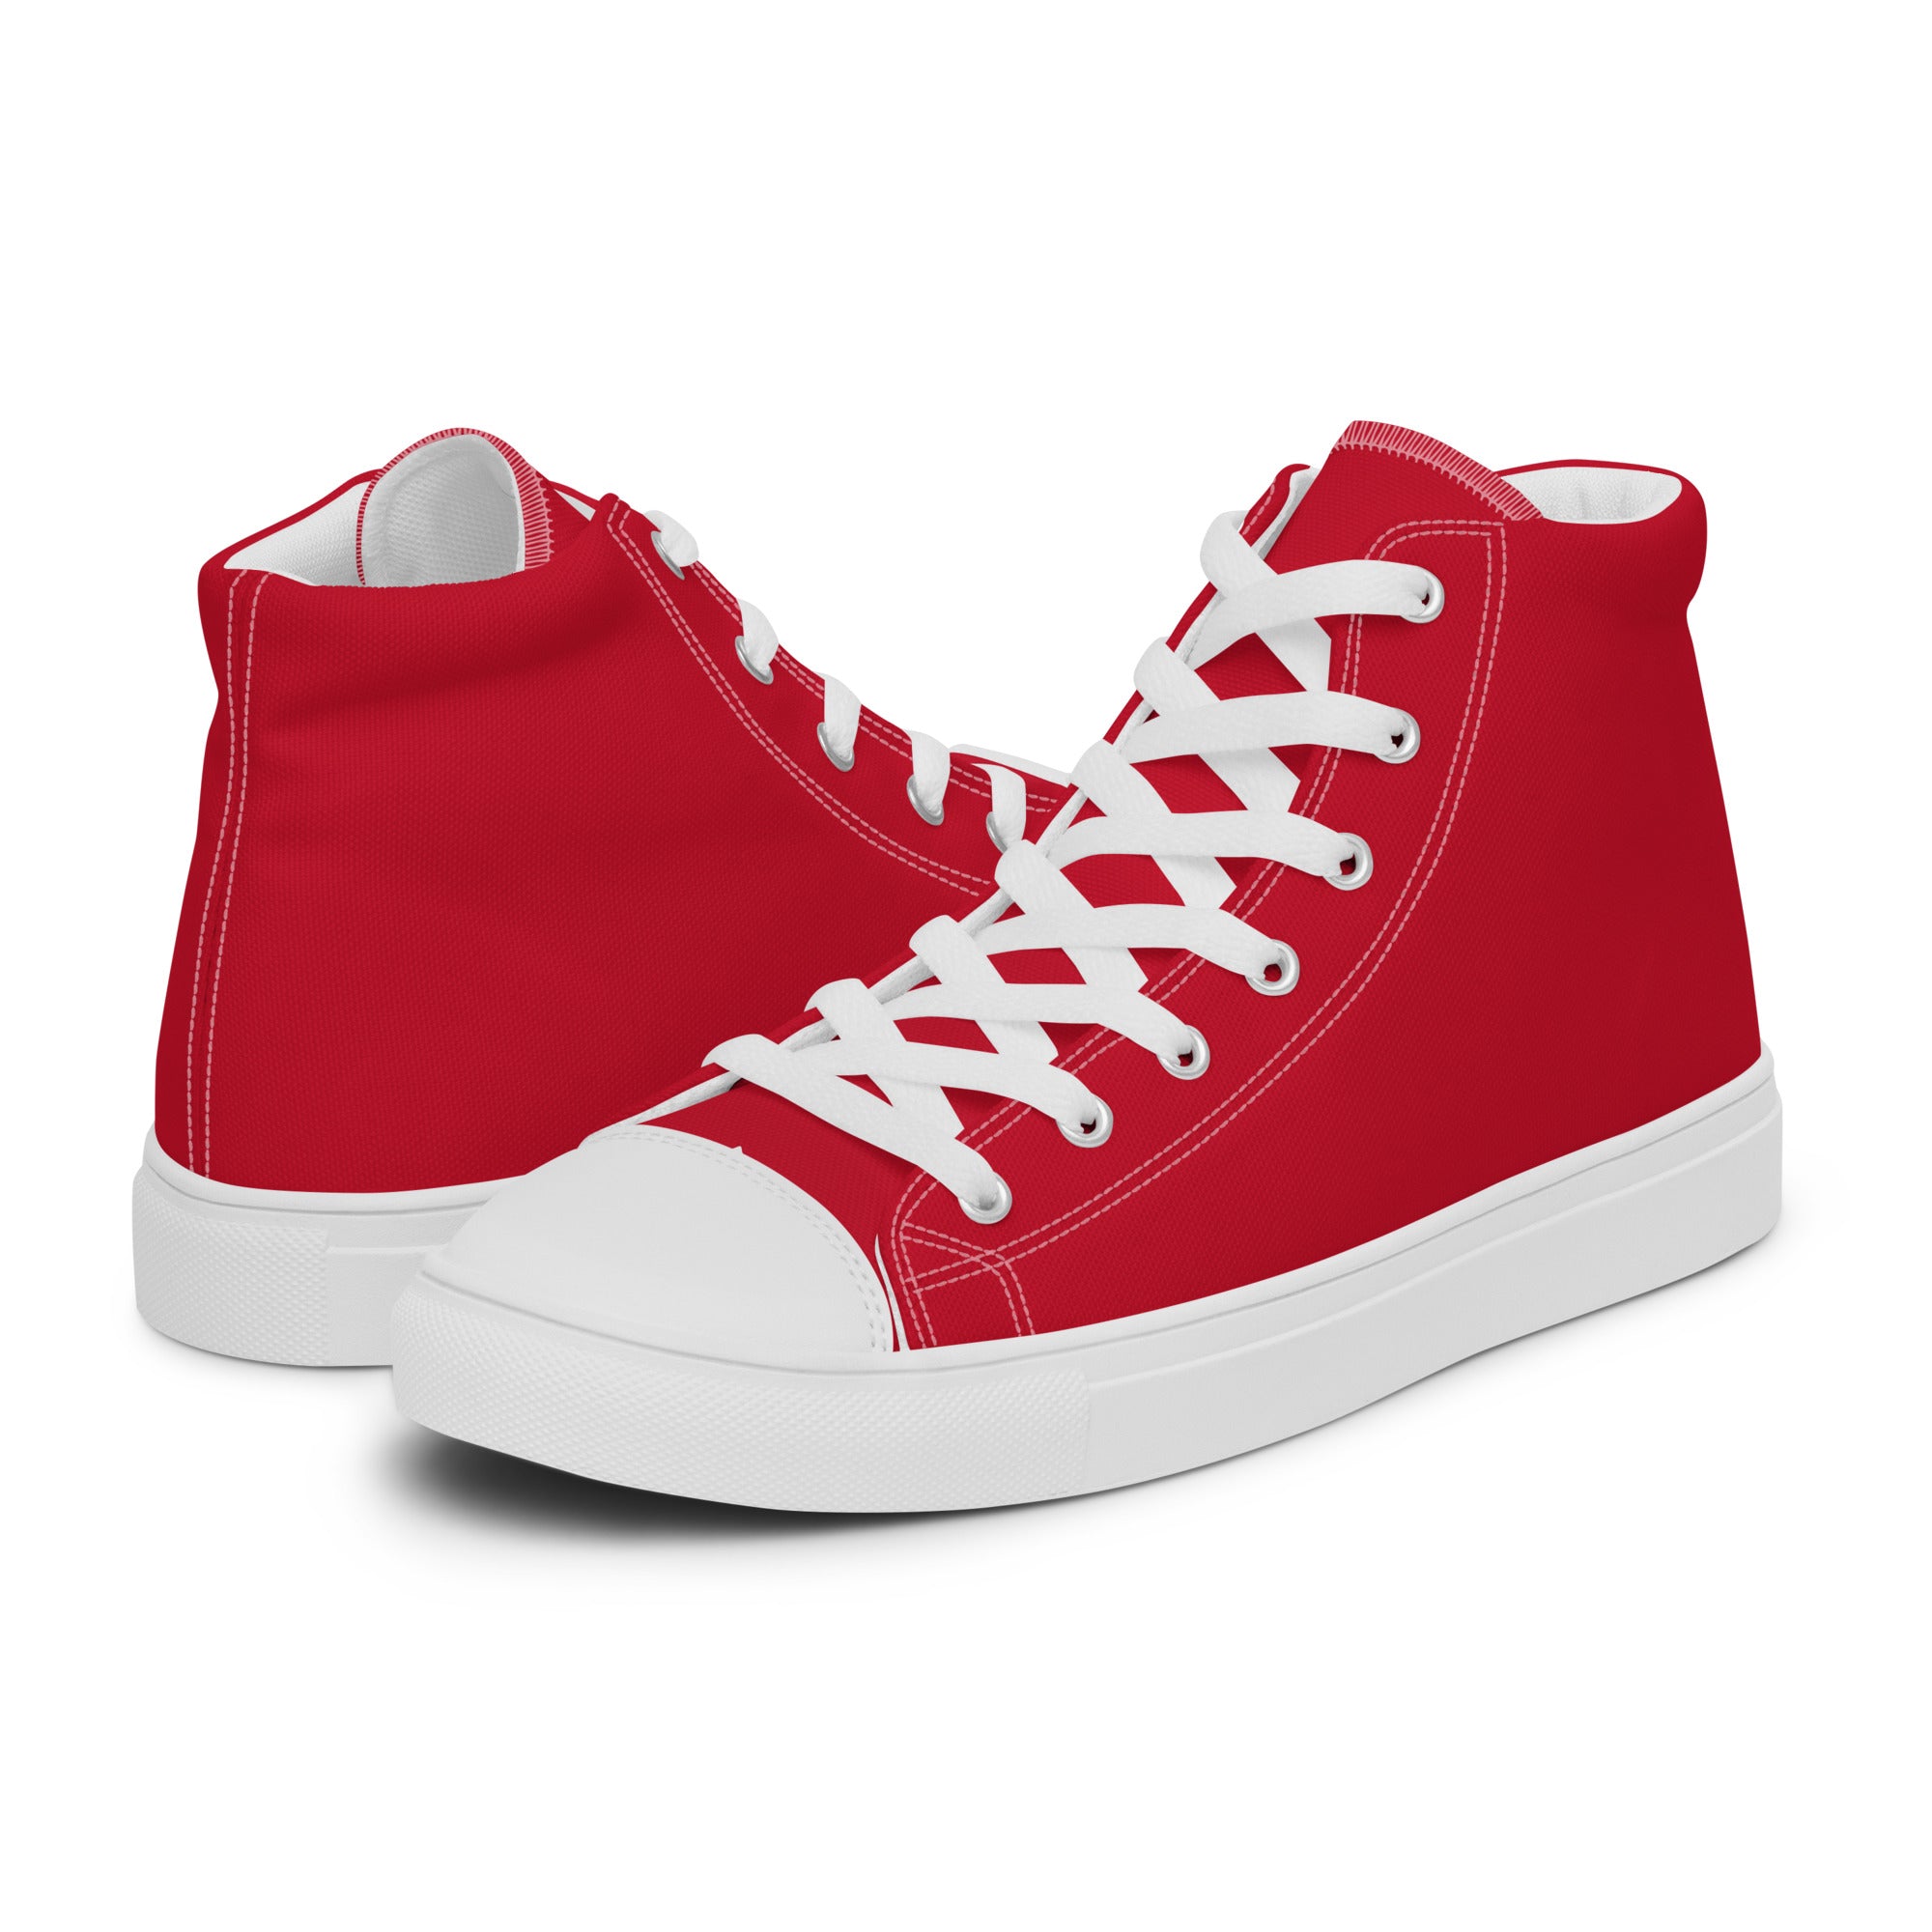 Women’s high top canvas shoes- Red